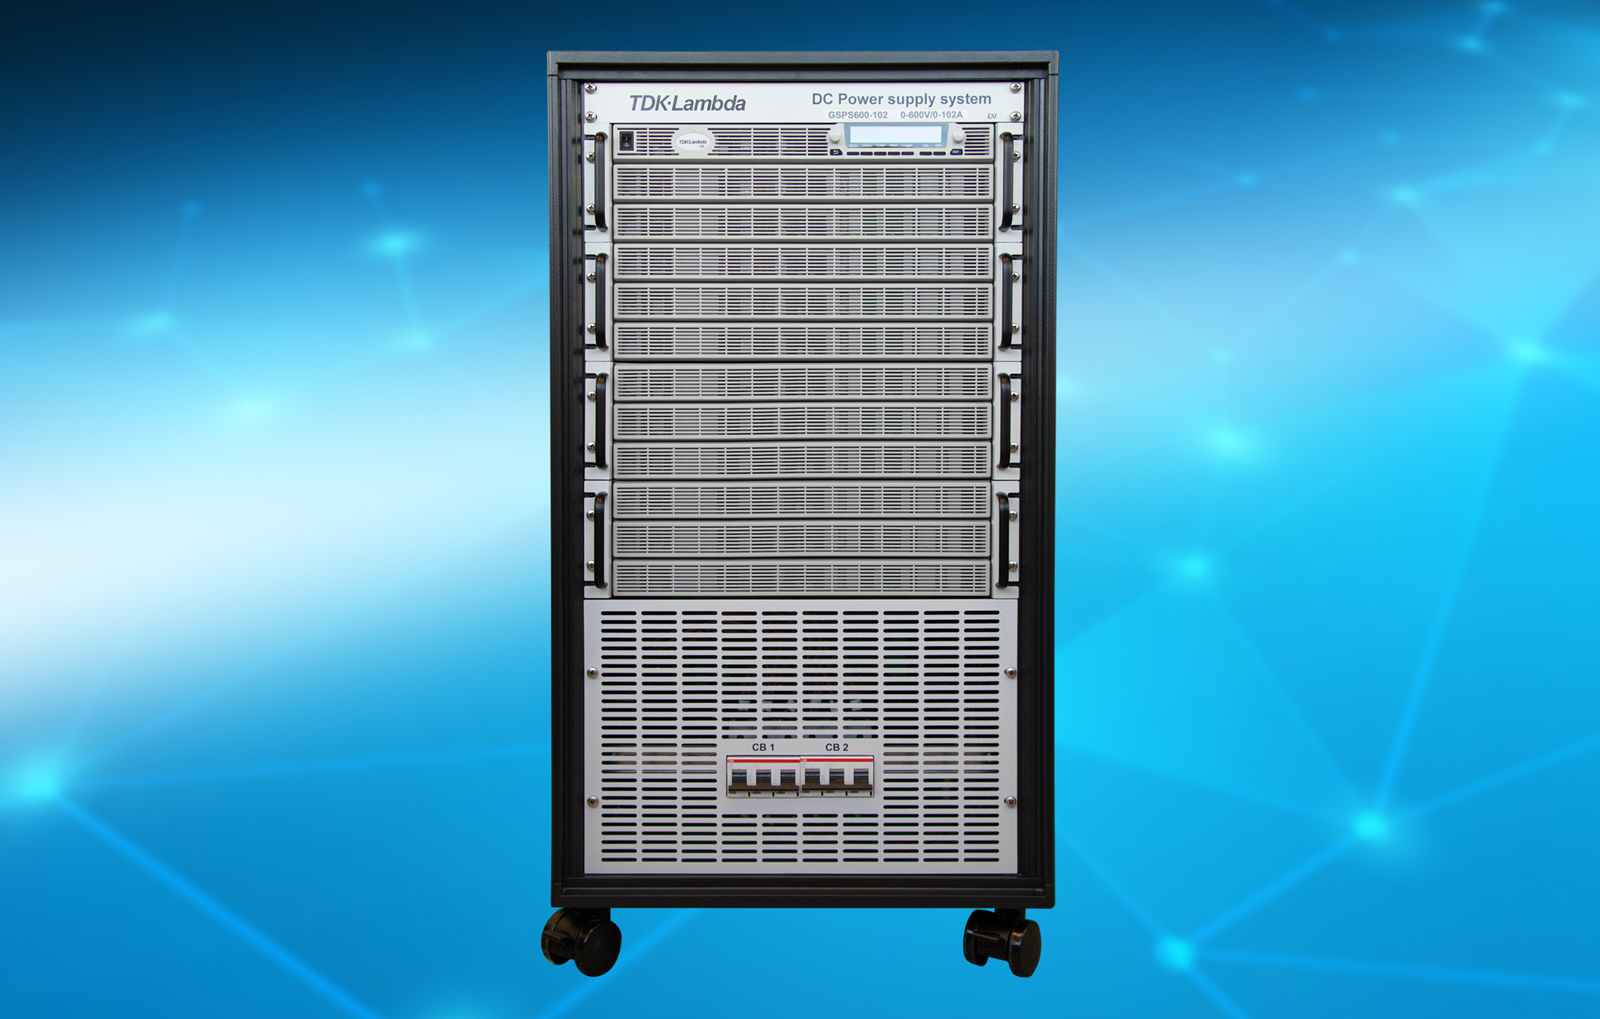 Configurable programmable power supply systems deliver 30 kW, 45 kW or 60 kW in a portable 20 U high 19-inch
        rack cabinet
    